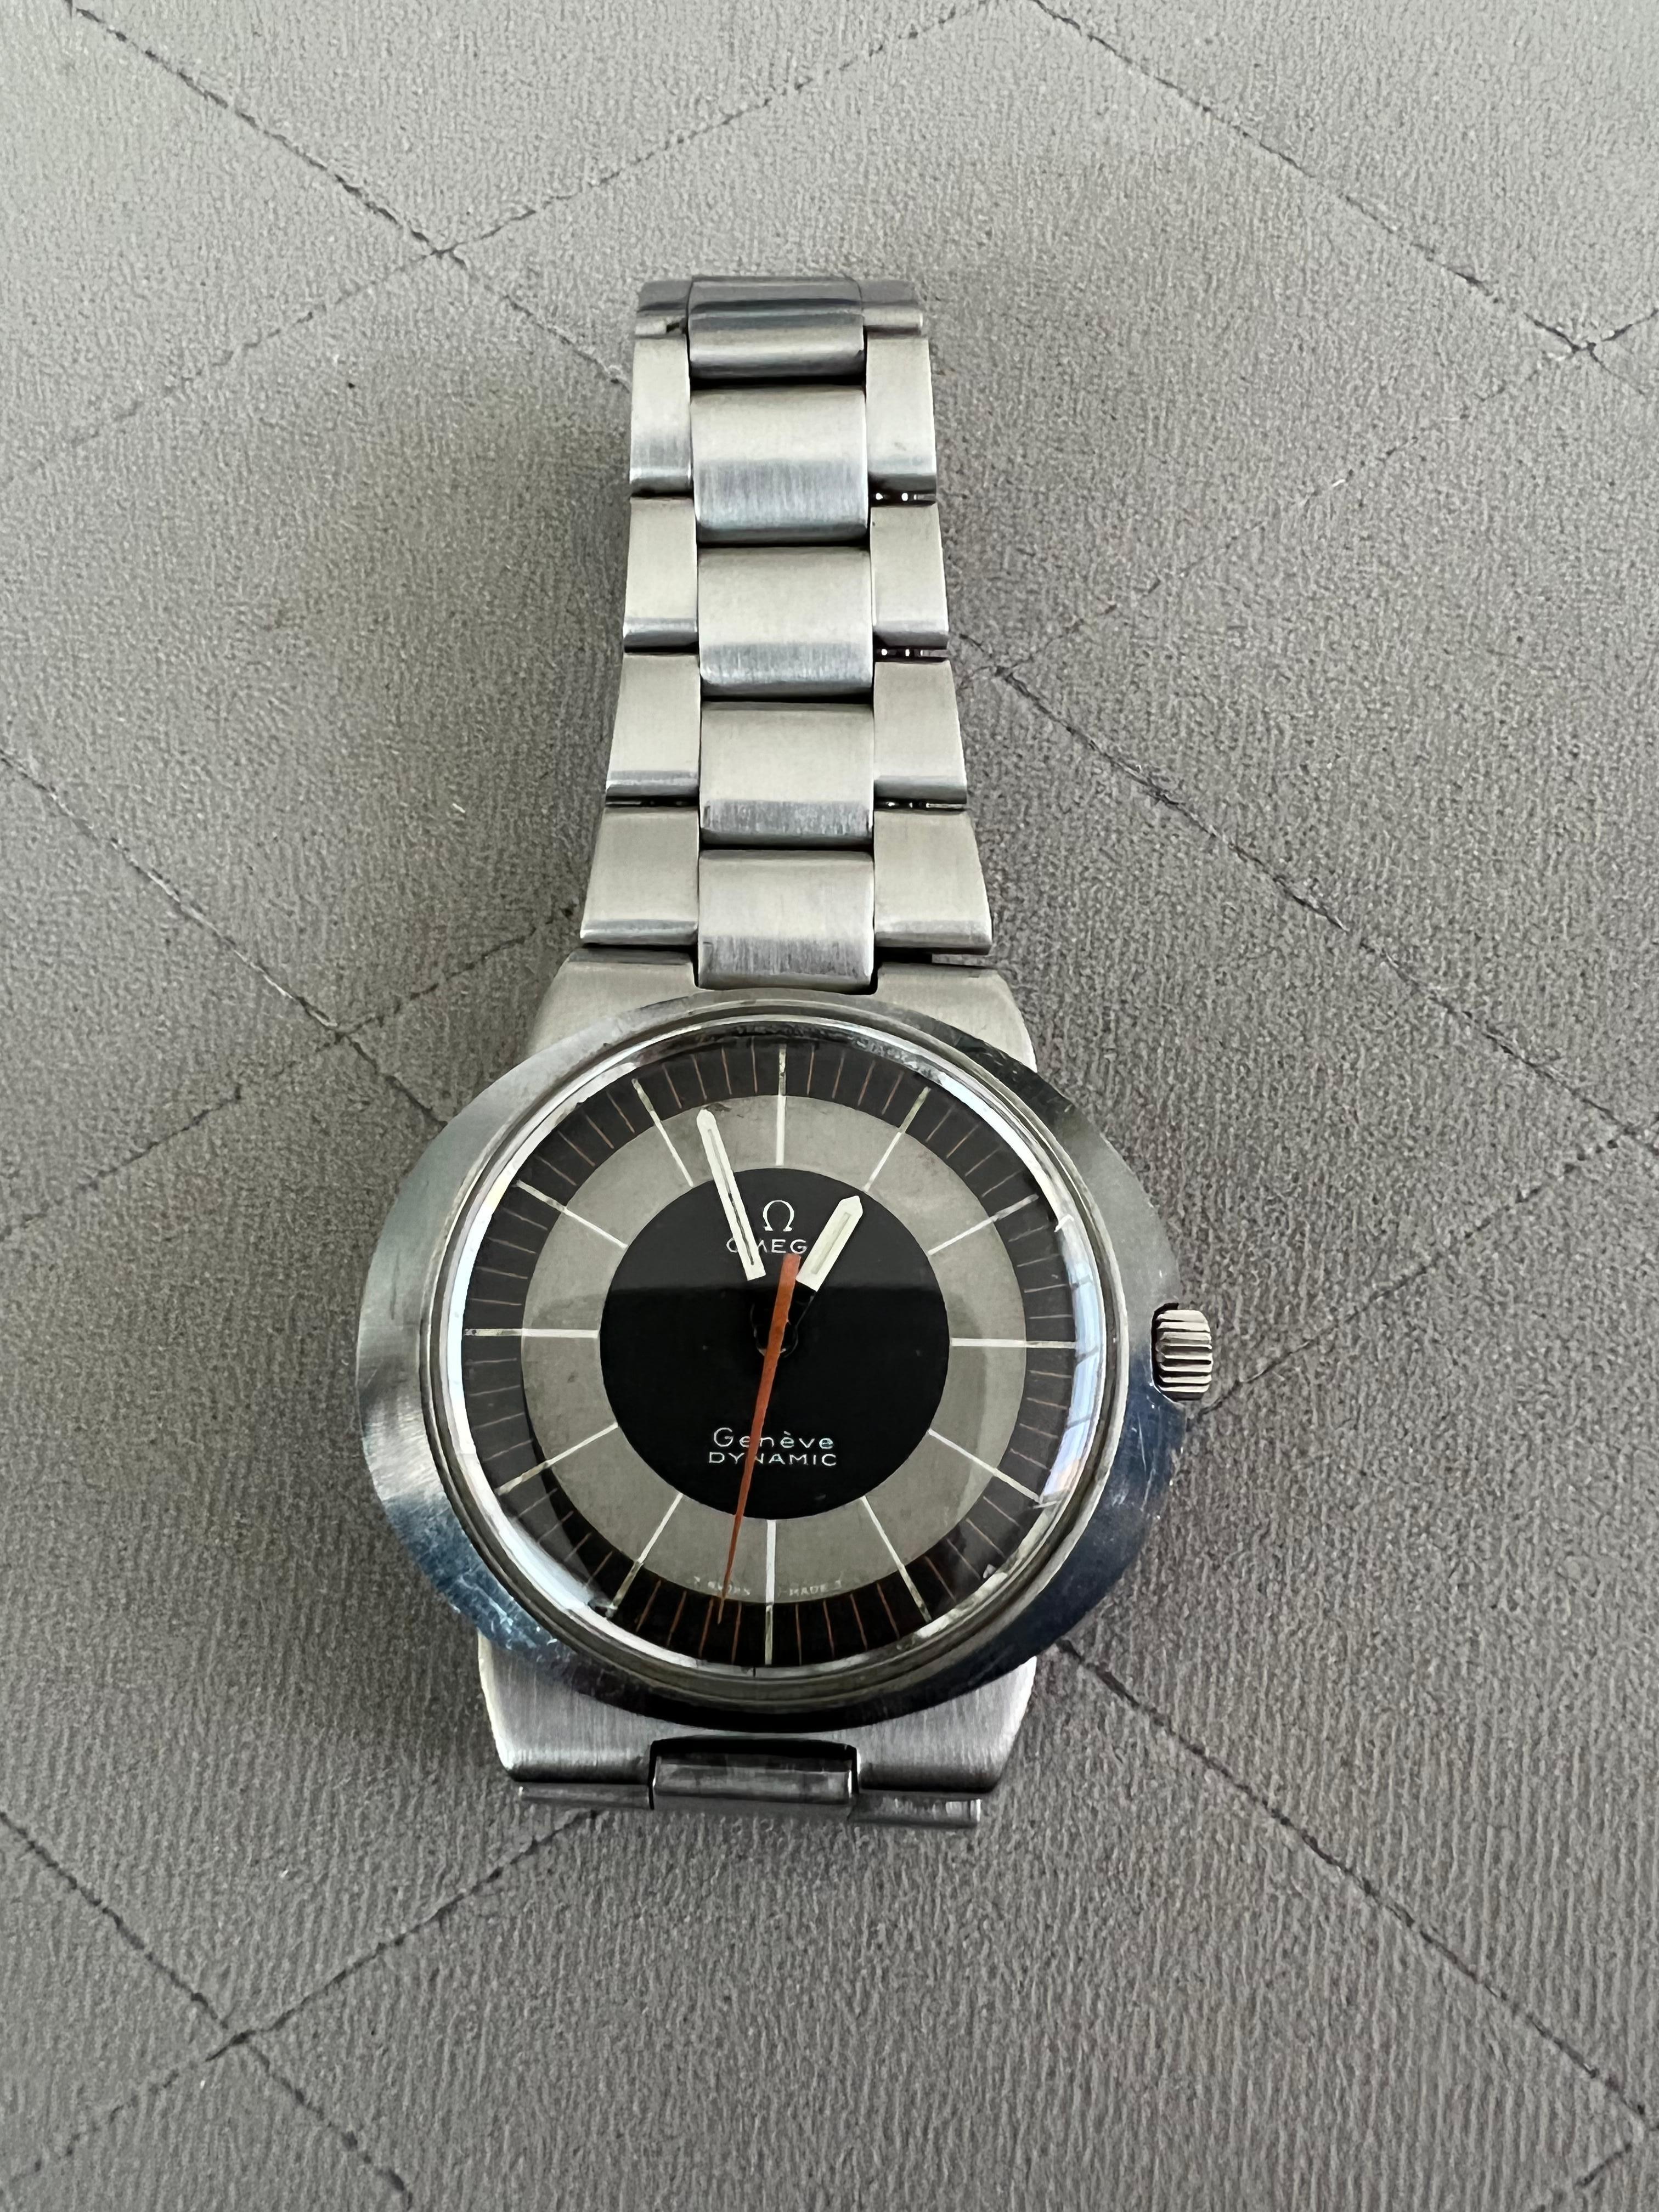 Women's or Men's Omega Dynamic Vintage c. 1970s Watch W/ Tricolored Dial